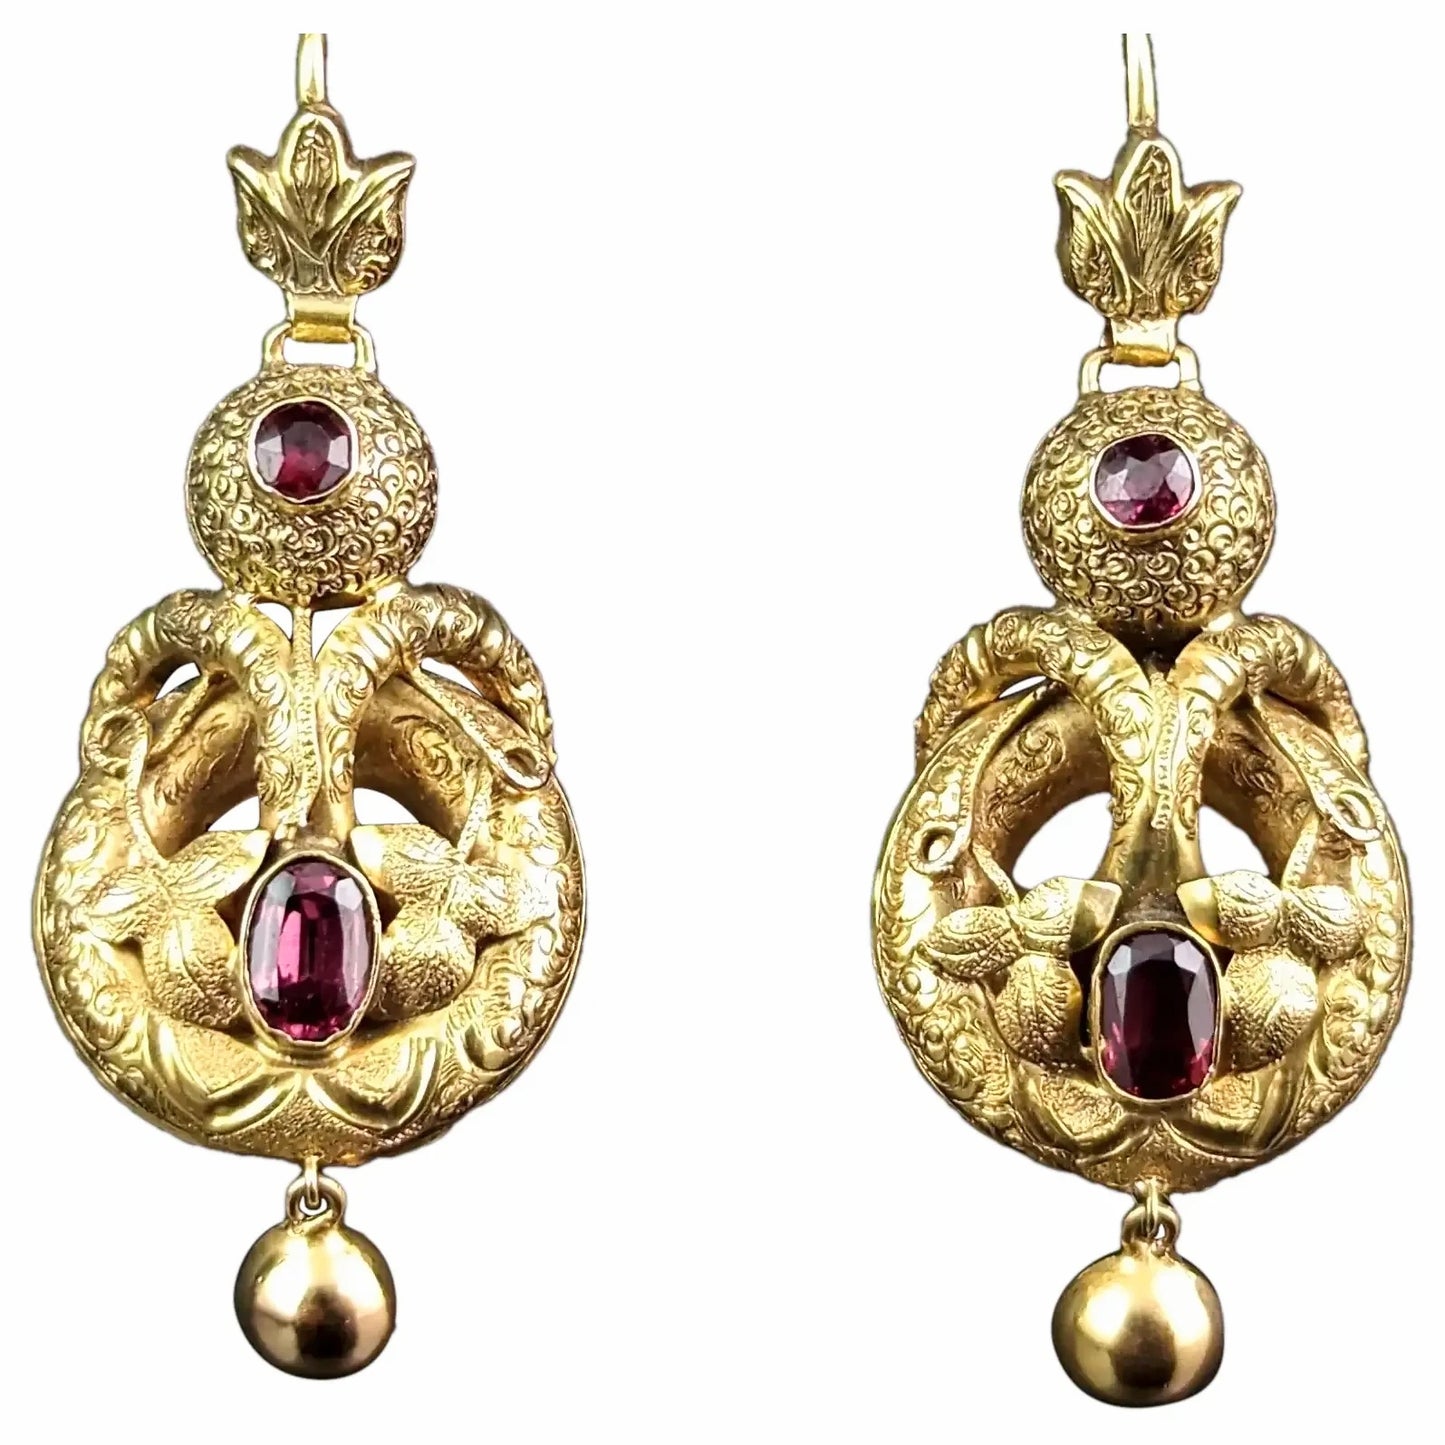 Antique Victorian garnet drop earrings, 18ct gold, Leaves and Vine